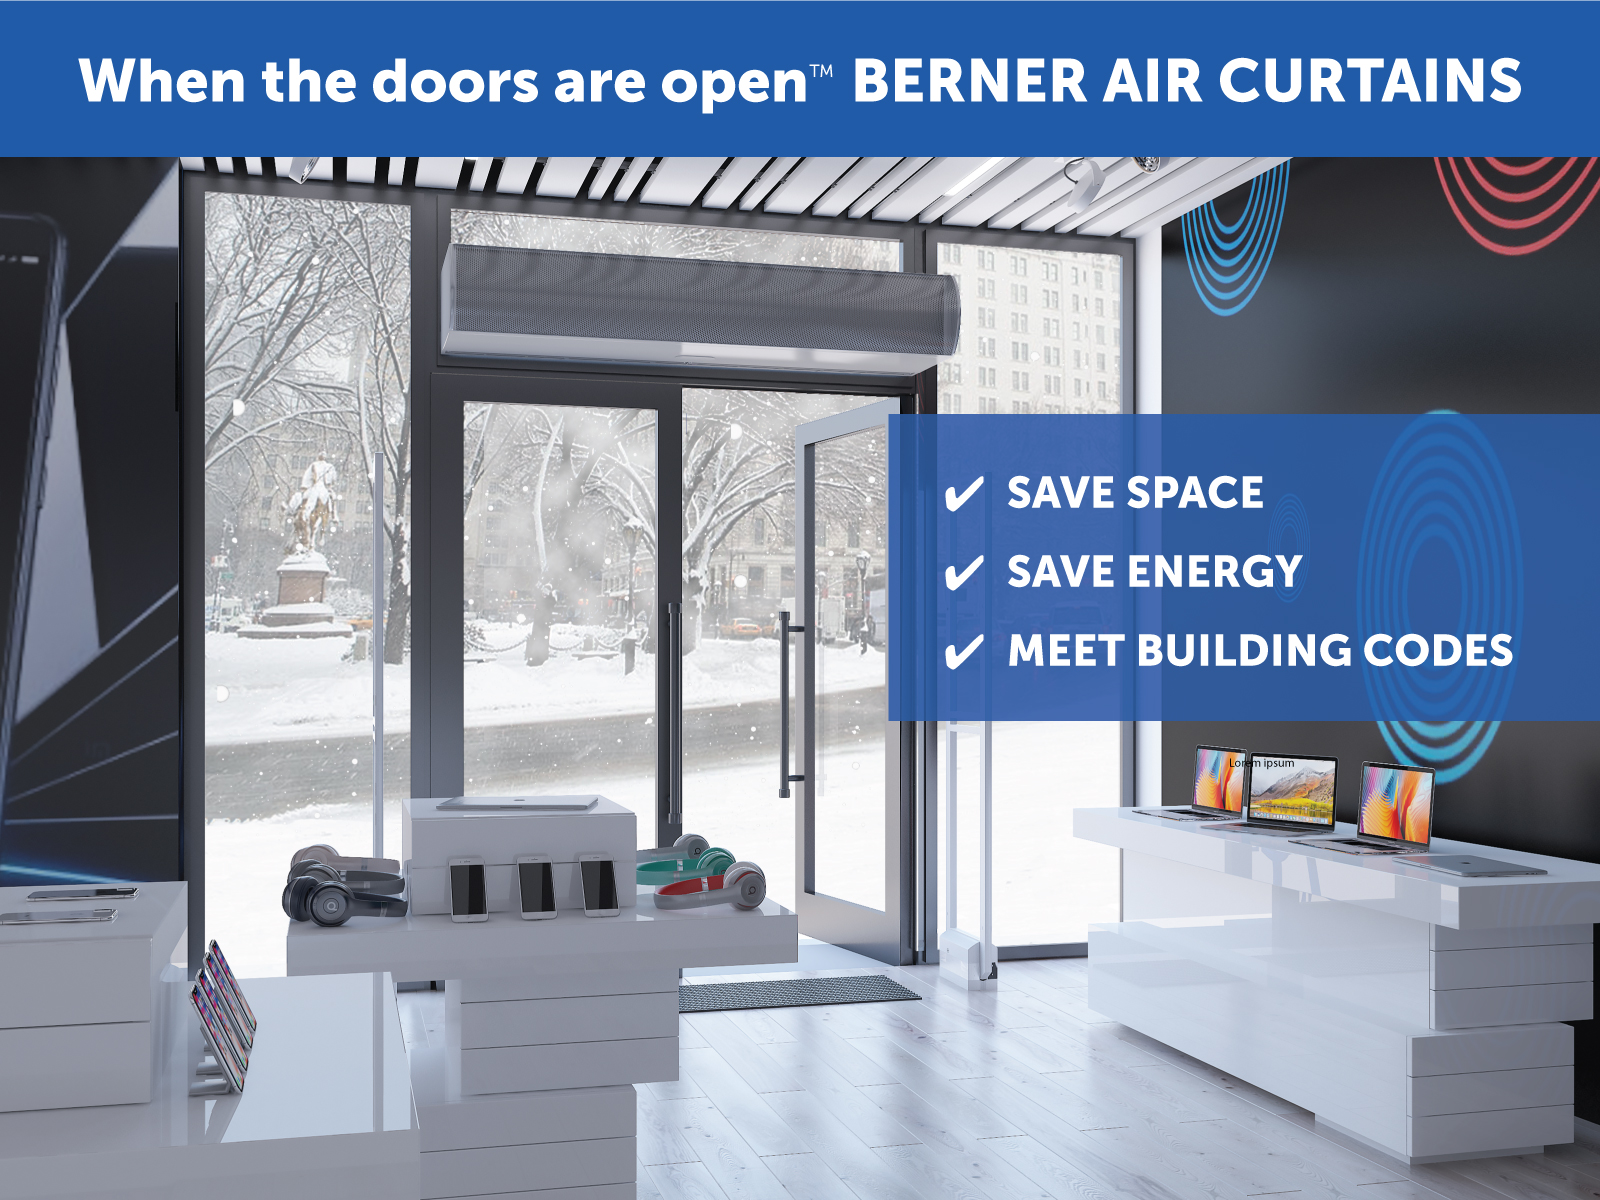 When the doors are open, Berner Air Curtains instead of vestibule.